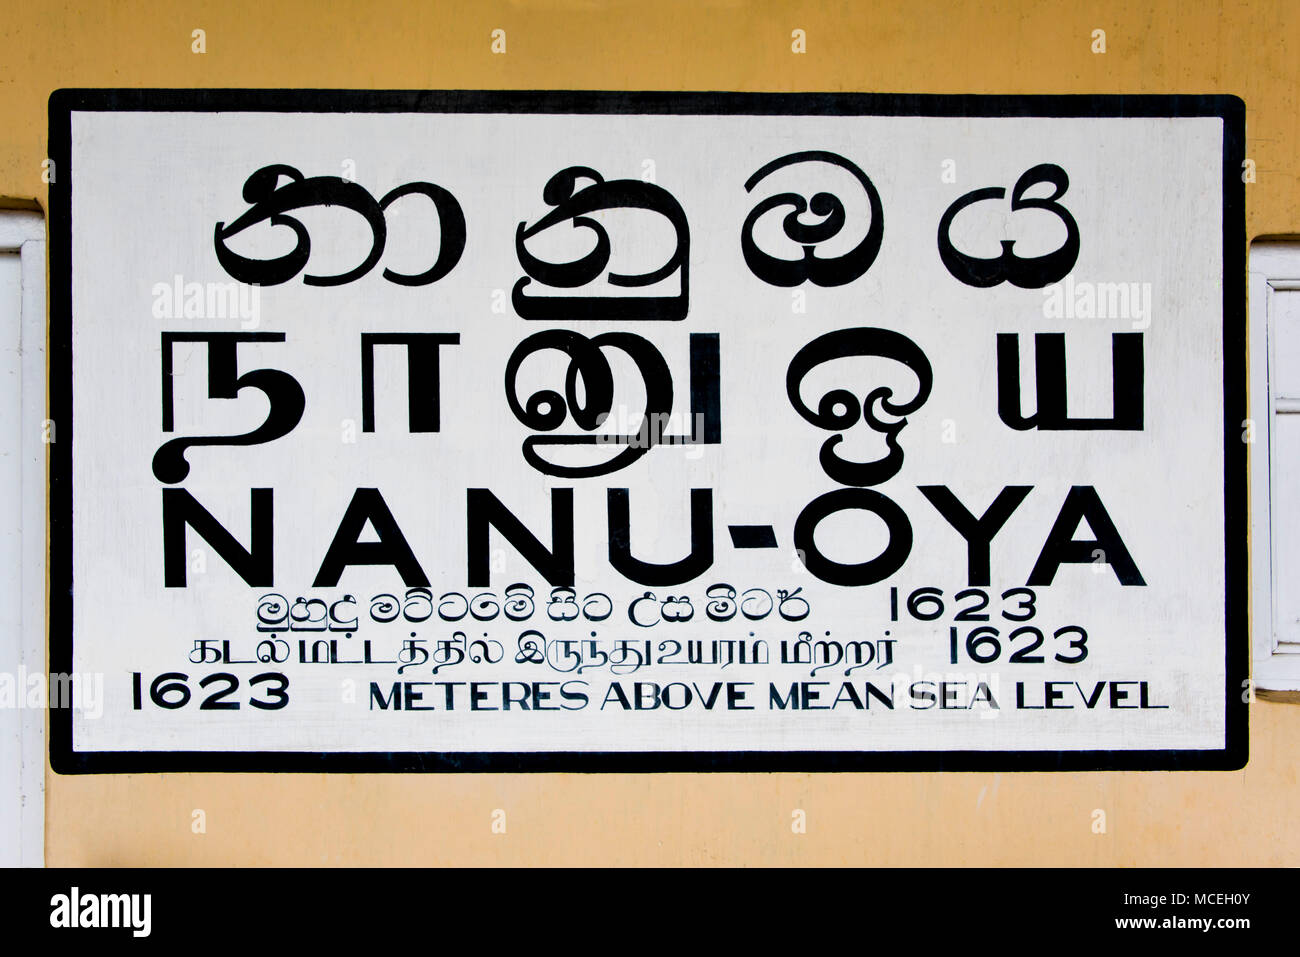 Horizontal view of the handpainted sign at Nanu-oya Train Station in the highlands of Sri Lanka. Stock Photo